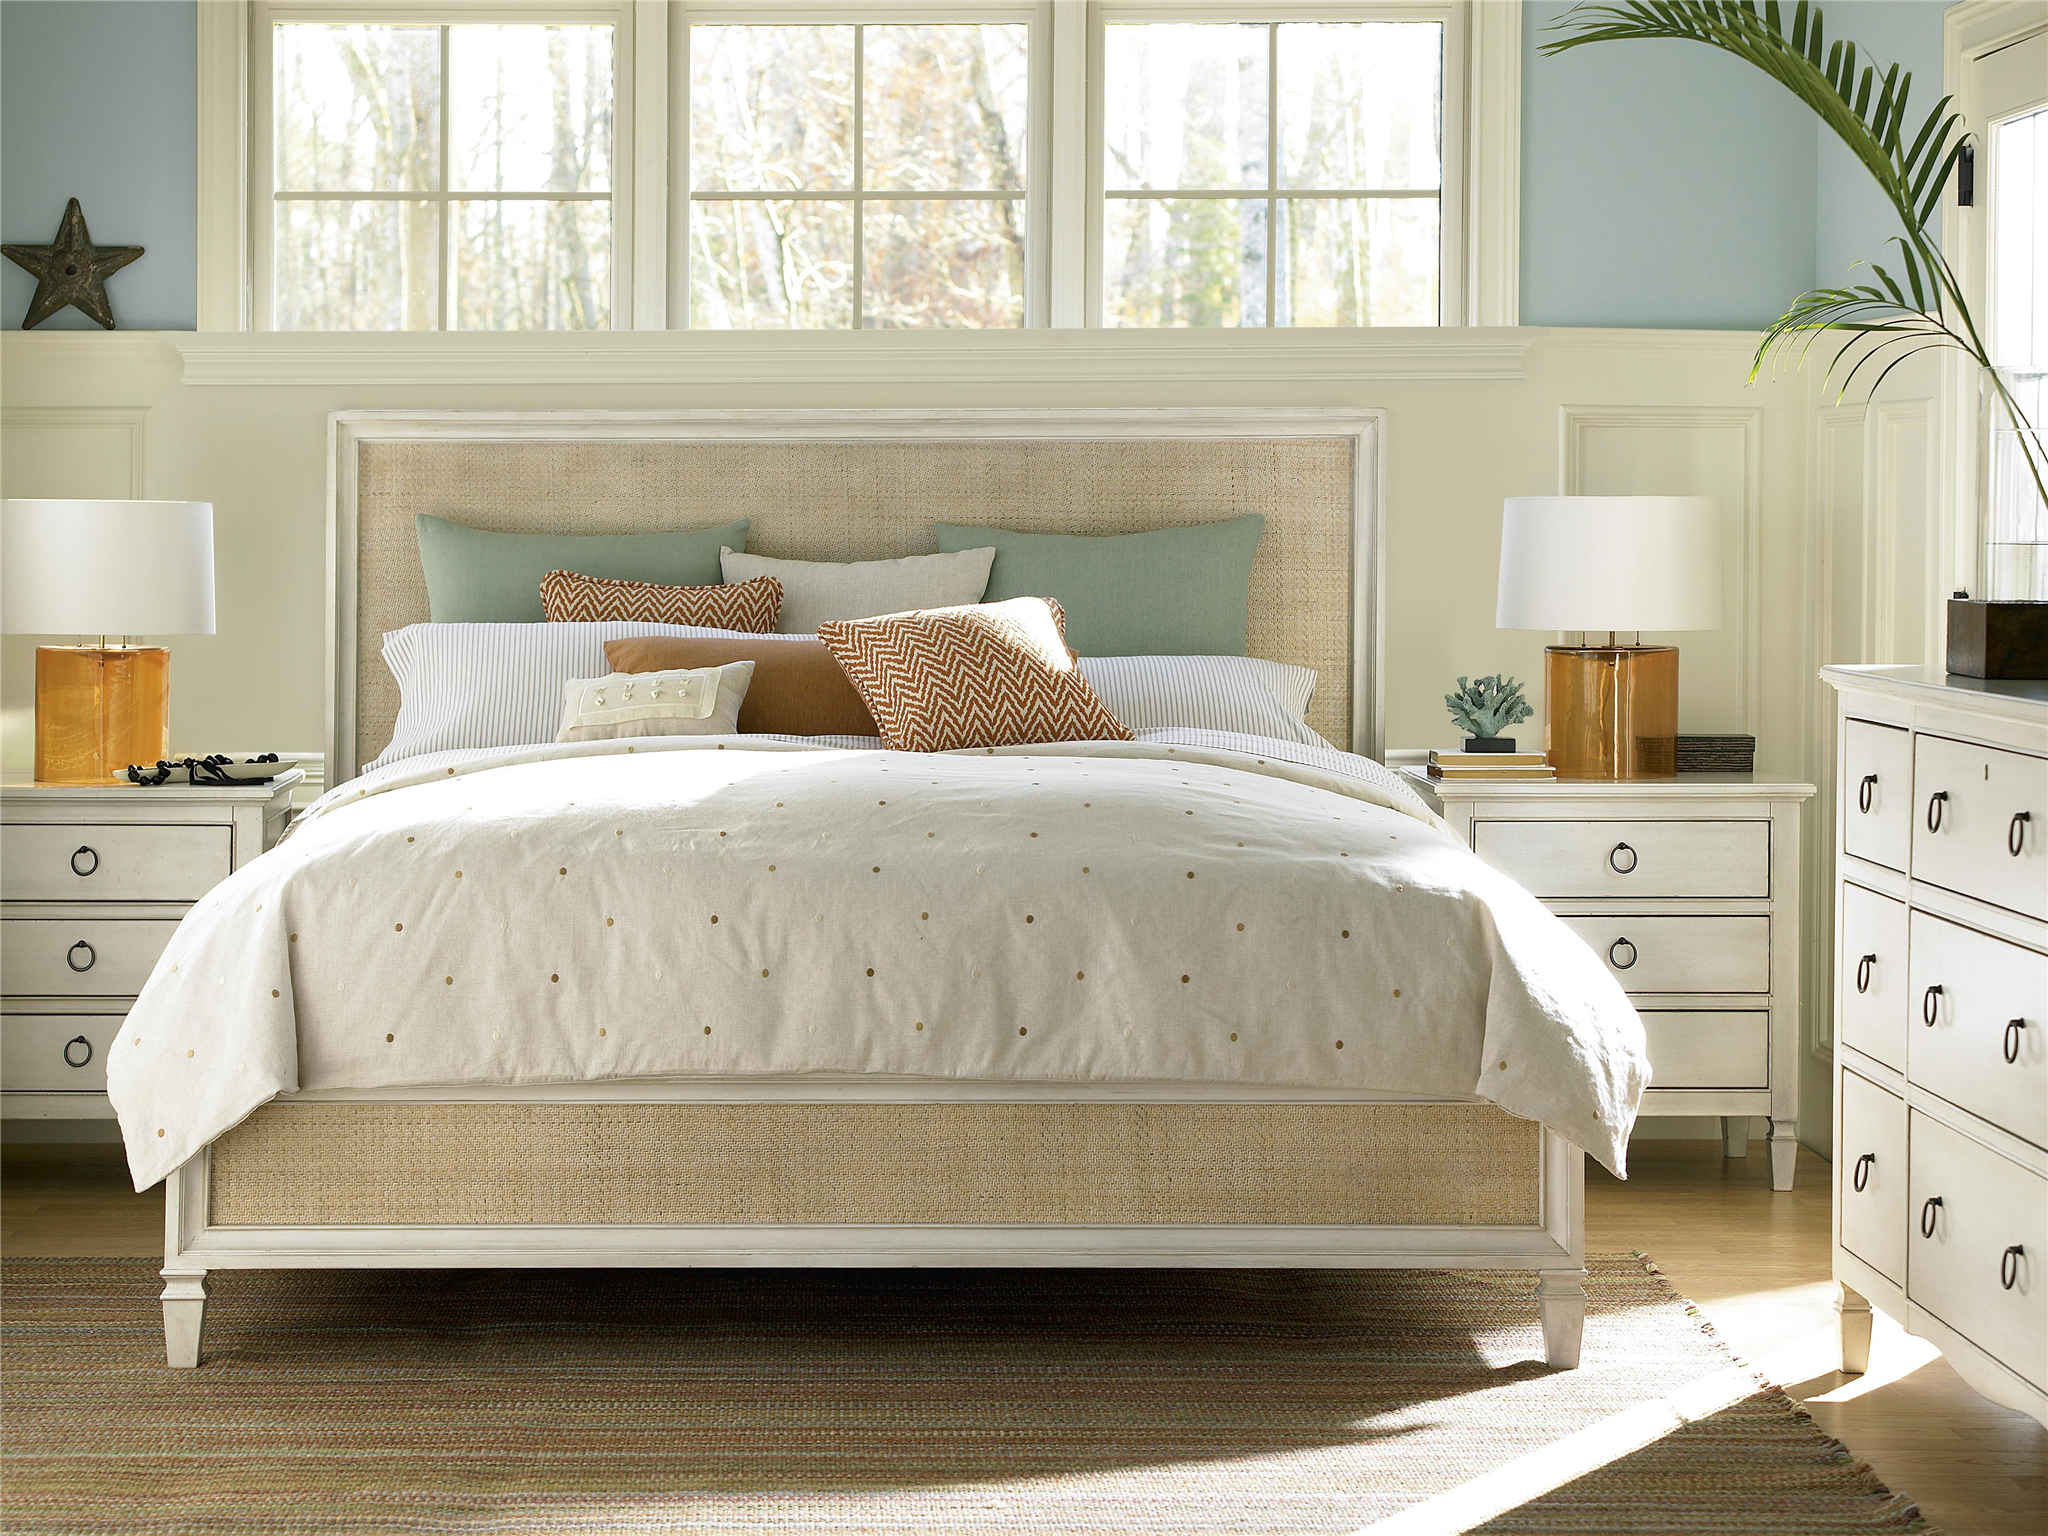 Woven Accent Cal King Bed